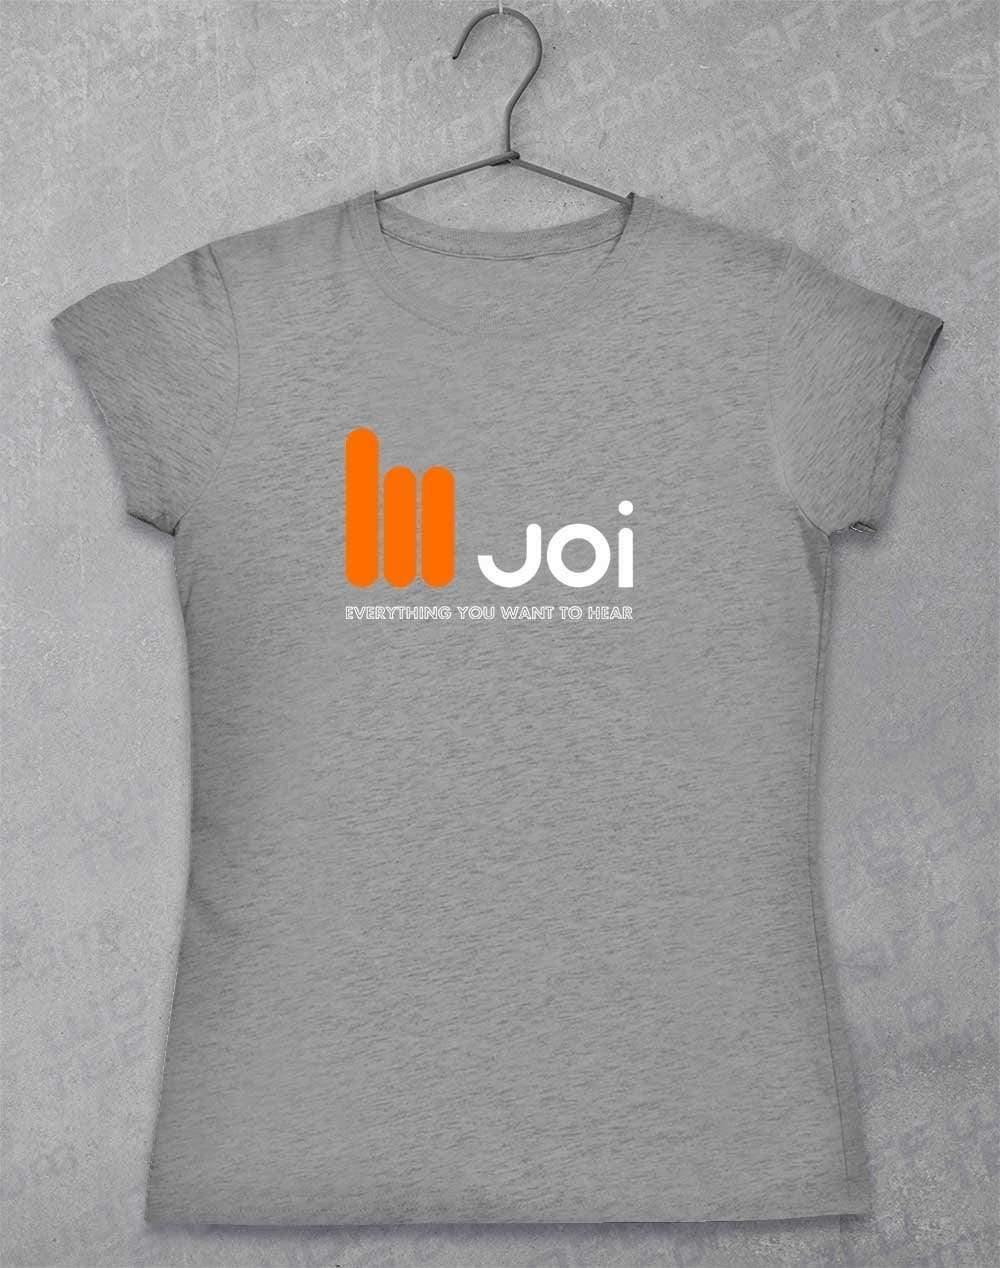 JOI Everything You Want to Hear Womens T-Shirt 8-10 / Sport Grey  - Off World Tees